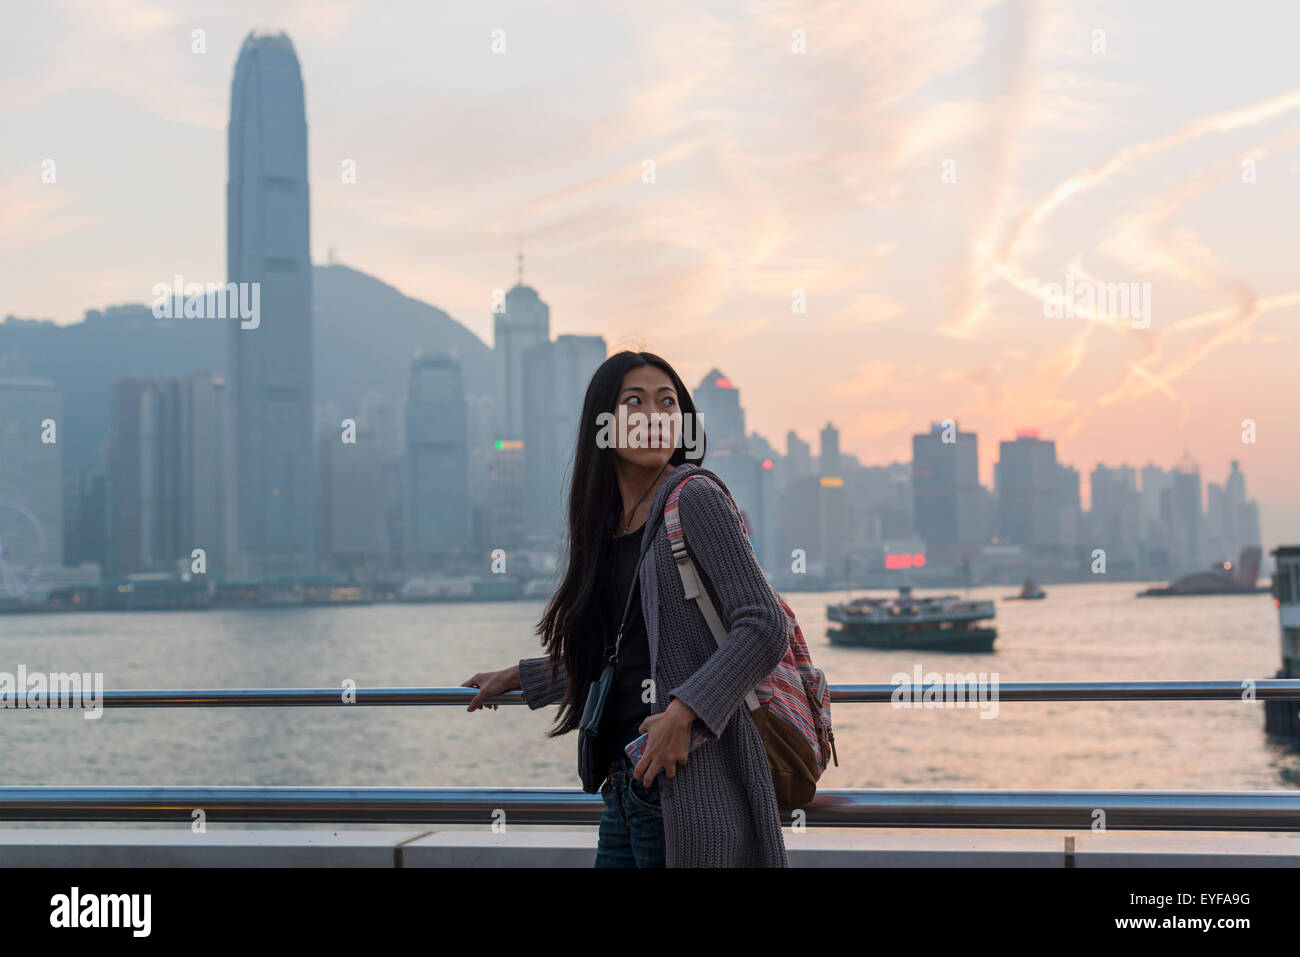 A young woman at the waterfront with a view of the skyline at sunset, Kowloon; Hong Kong, China Stock Photo